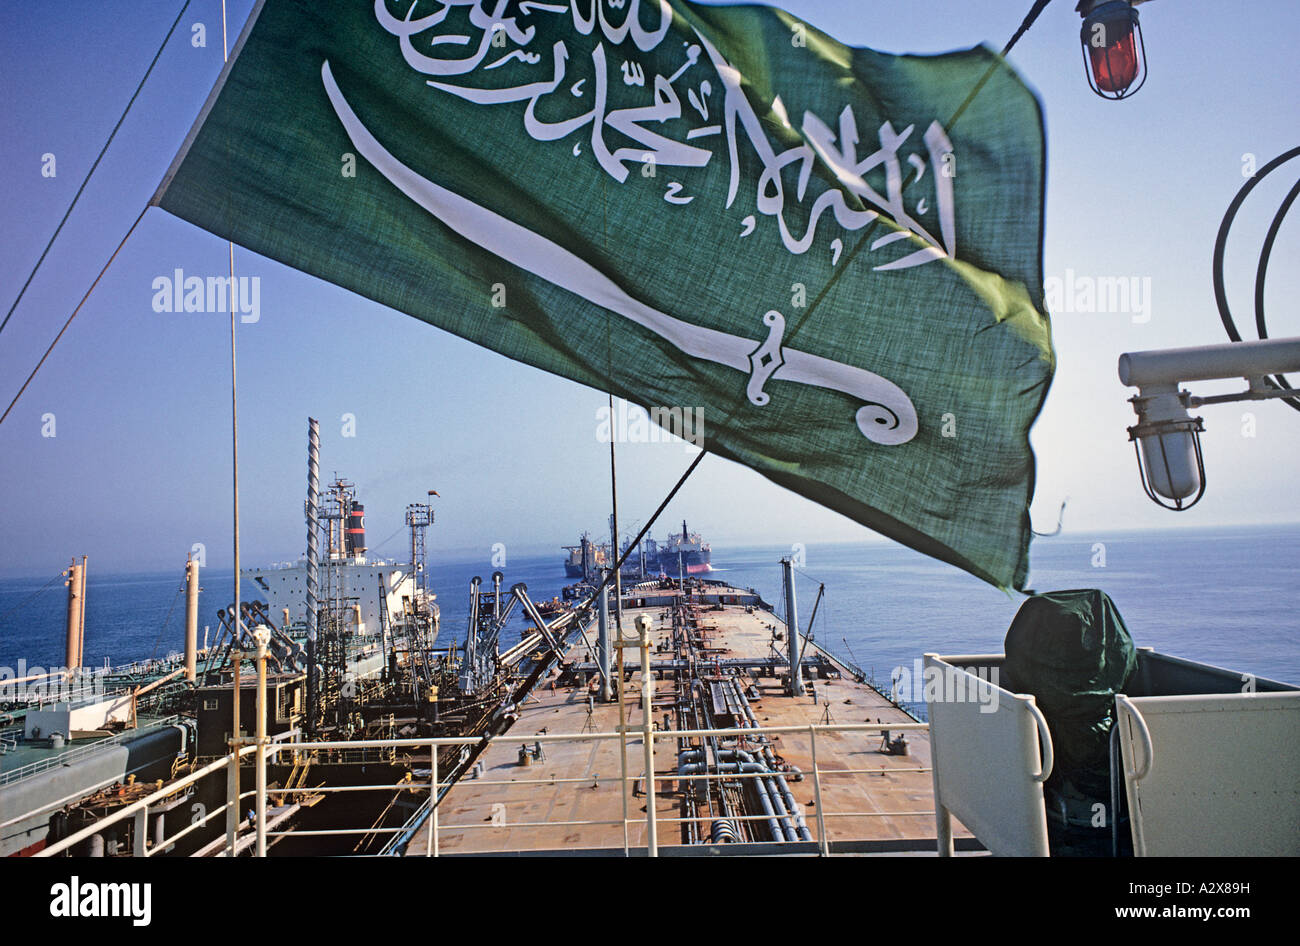 Saudi Arabian flag flies over ship loading oil. 'There is one God but God' it proclaims, with a sword beneath it. Stock Photo